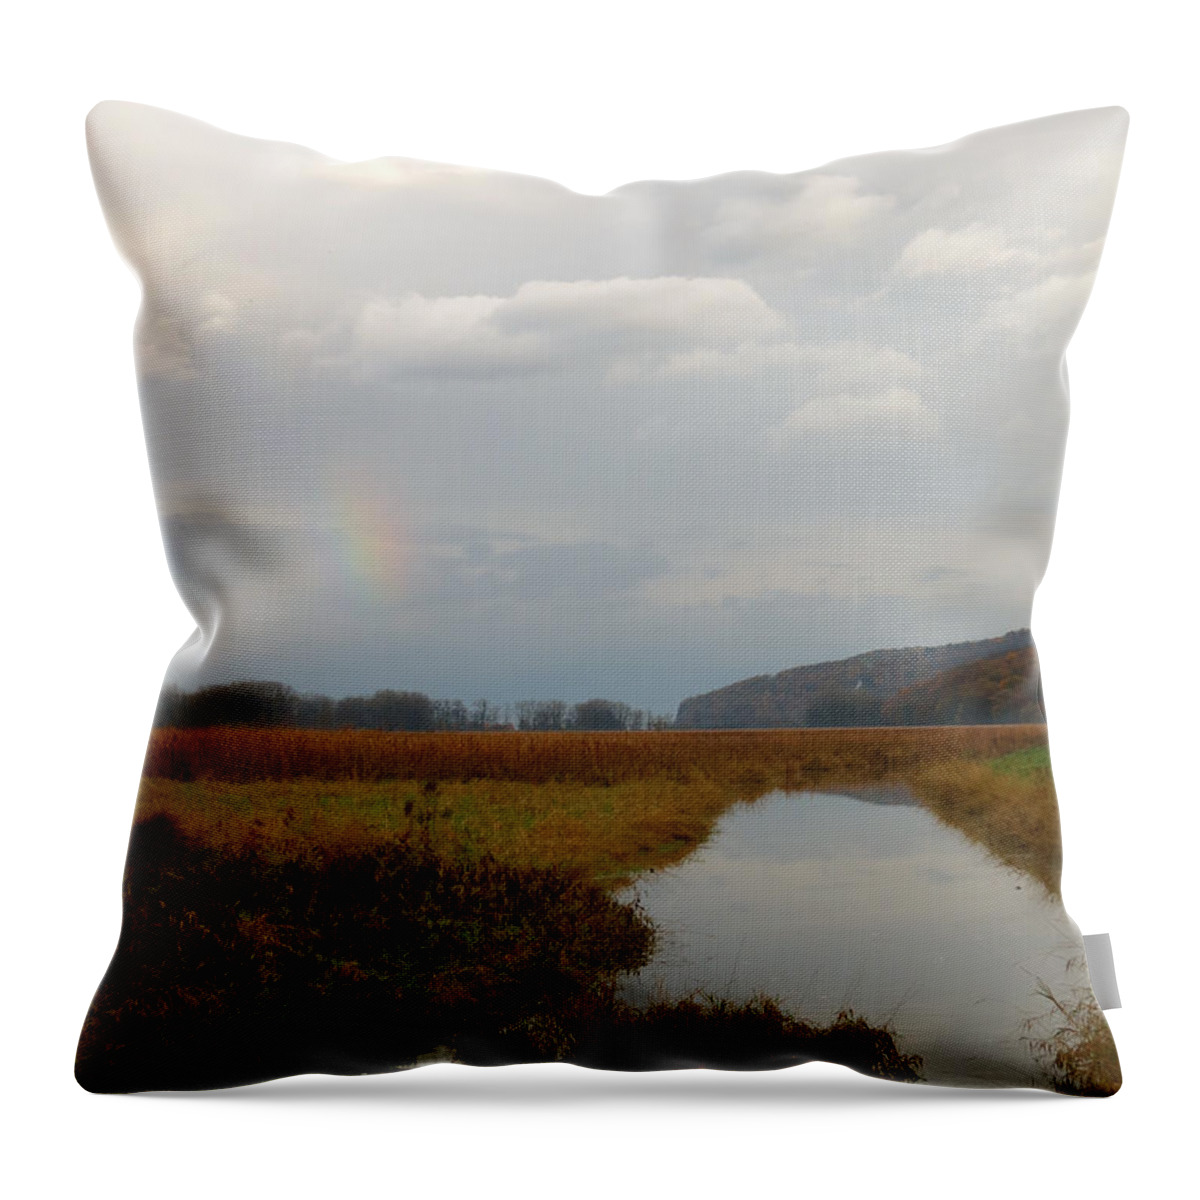 Rainbow Throw Pillow featuring the photograph Sunless Rainbow by Azthet Photography